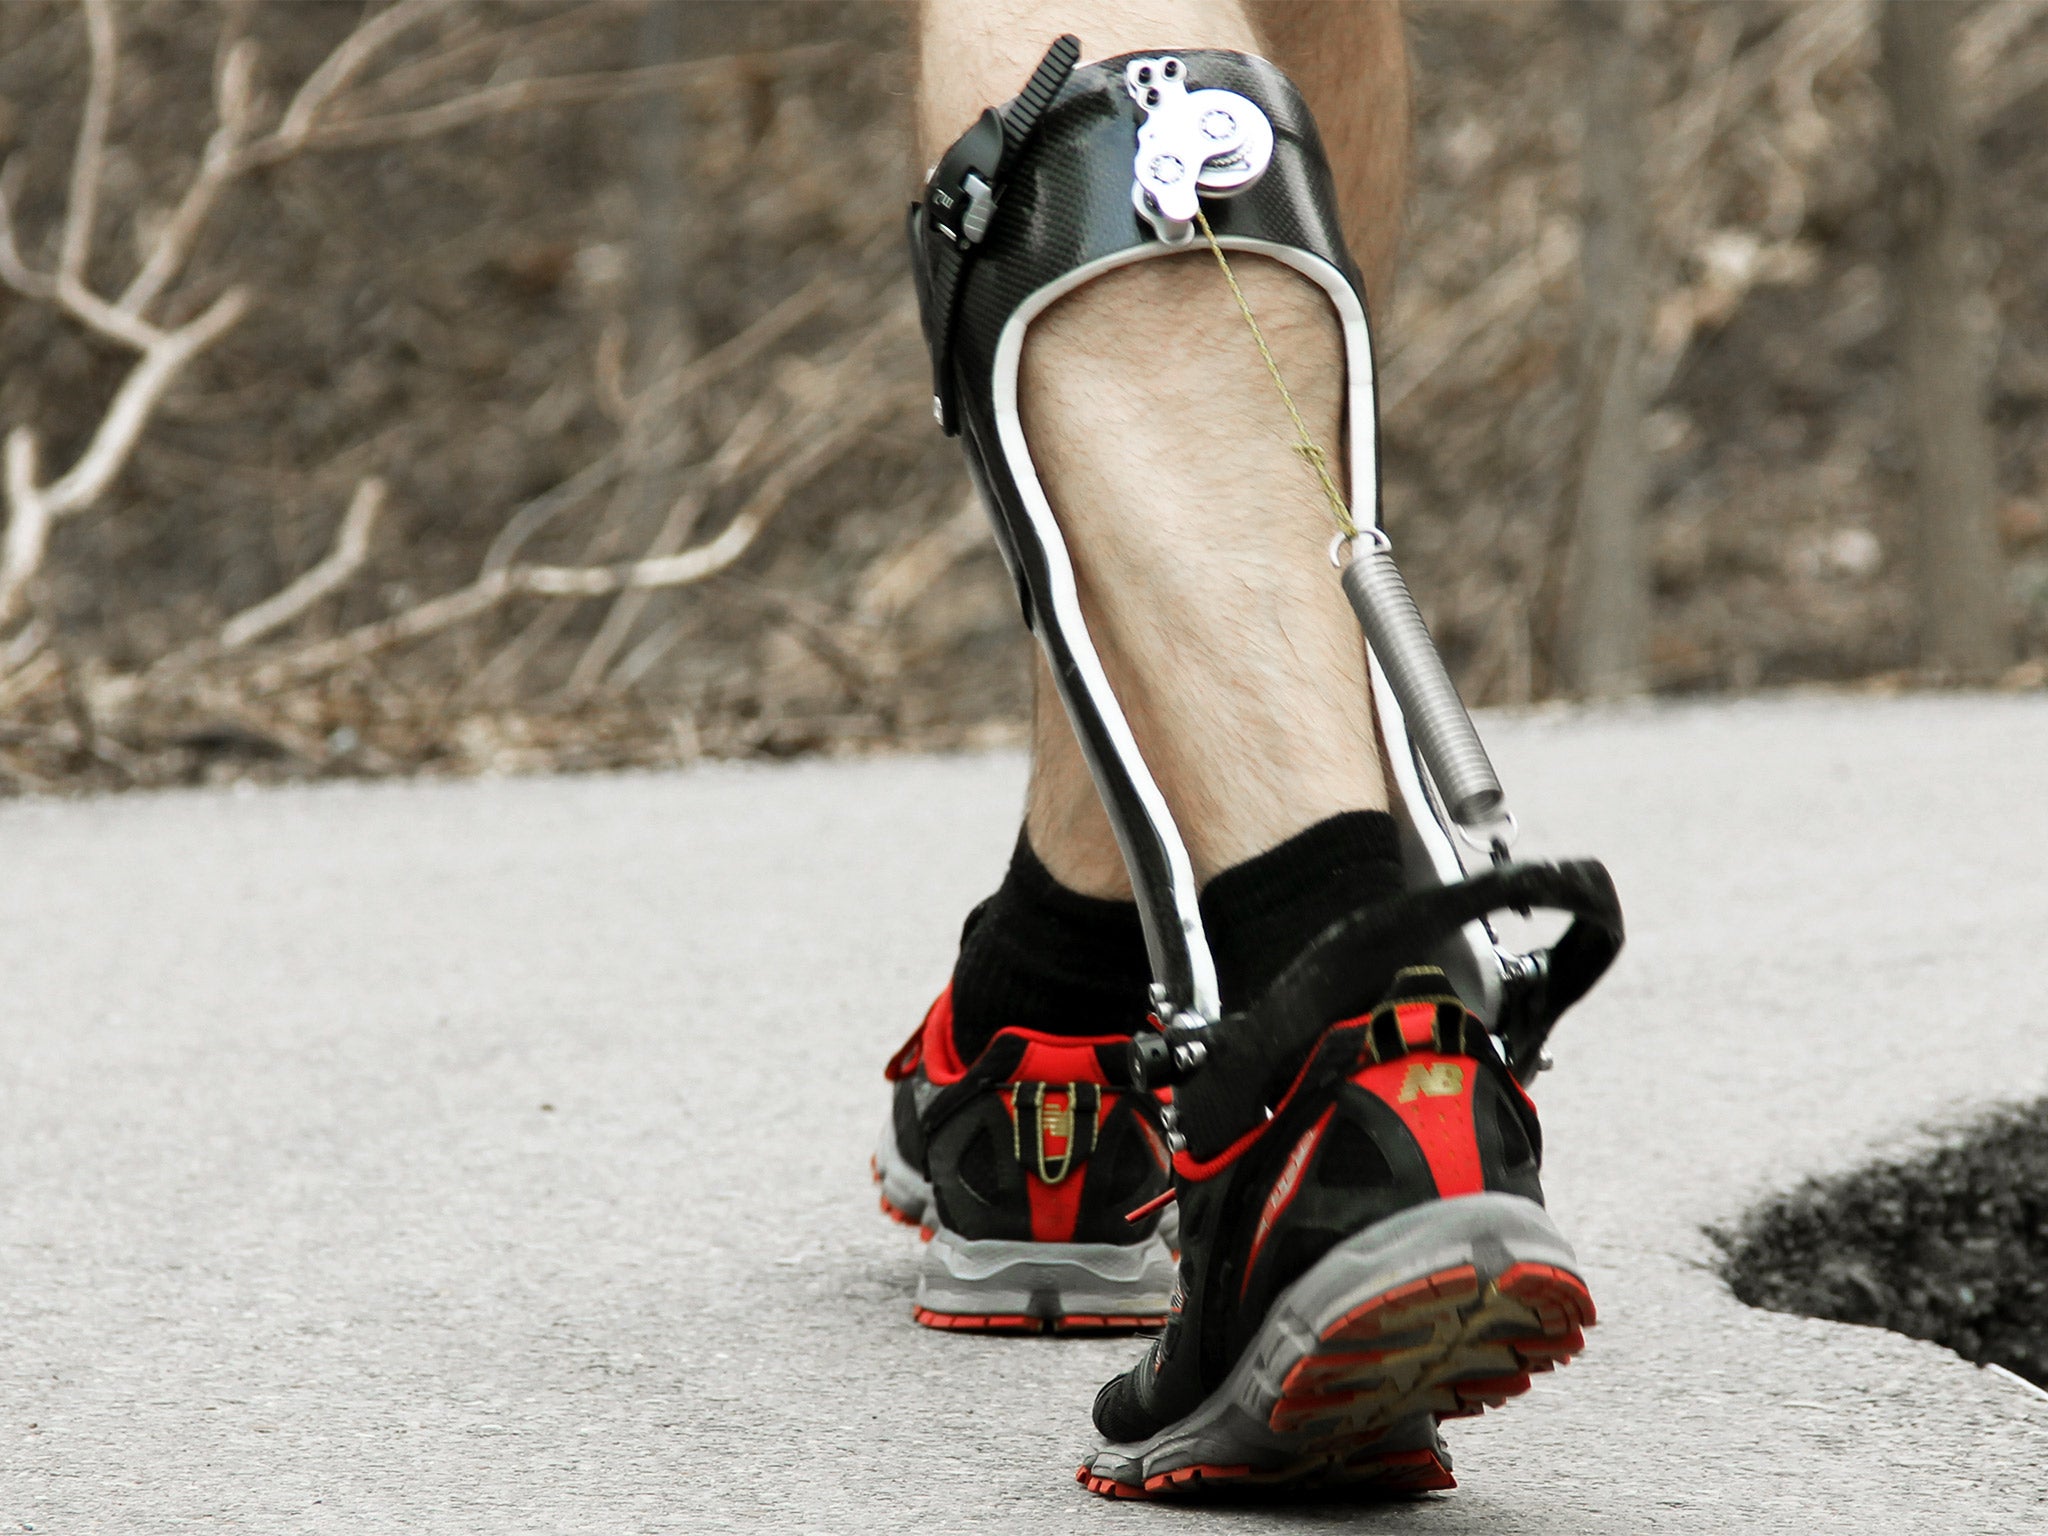 The spring-loaded braces can improve walking efficiency by about 7 per cent – like taking 9lbs out of a backpack